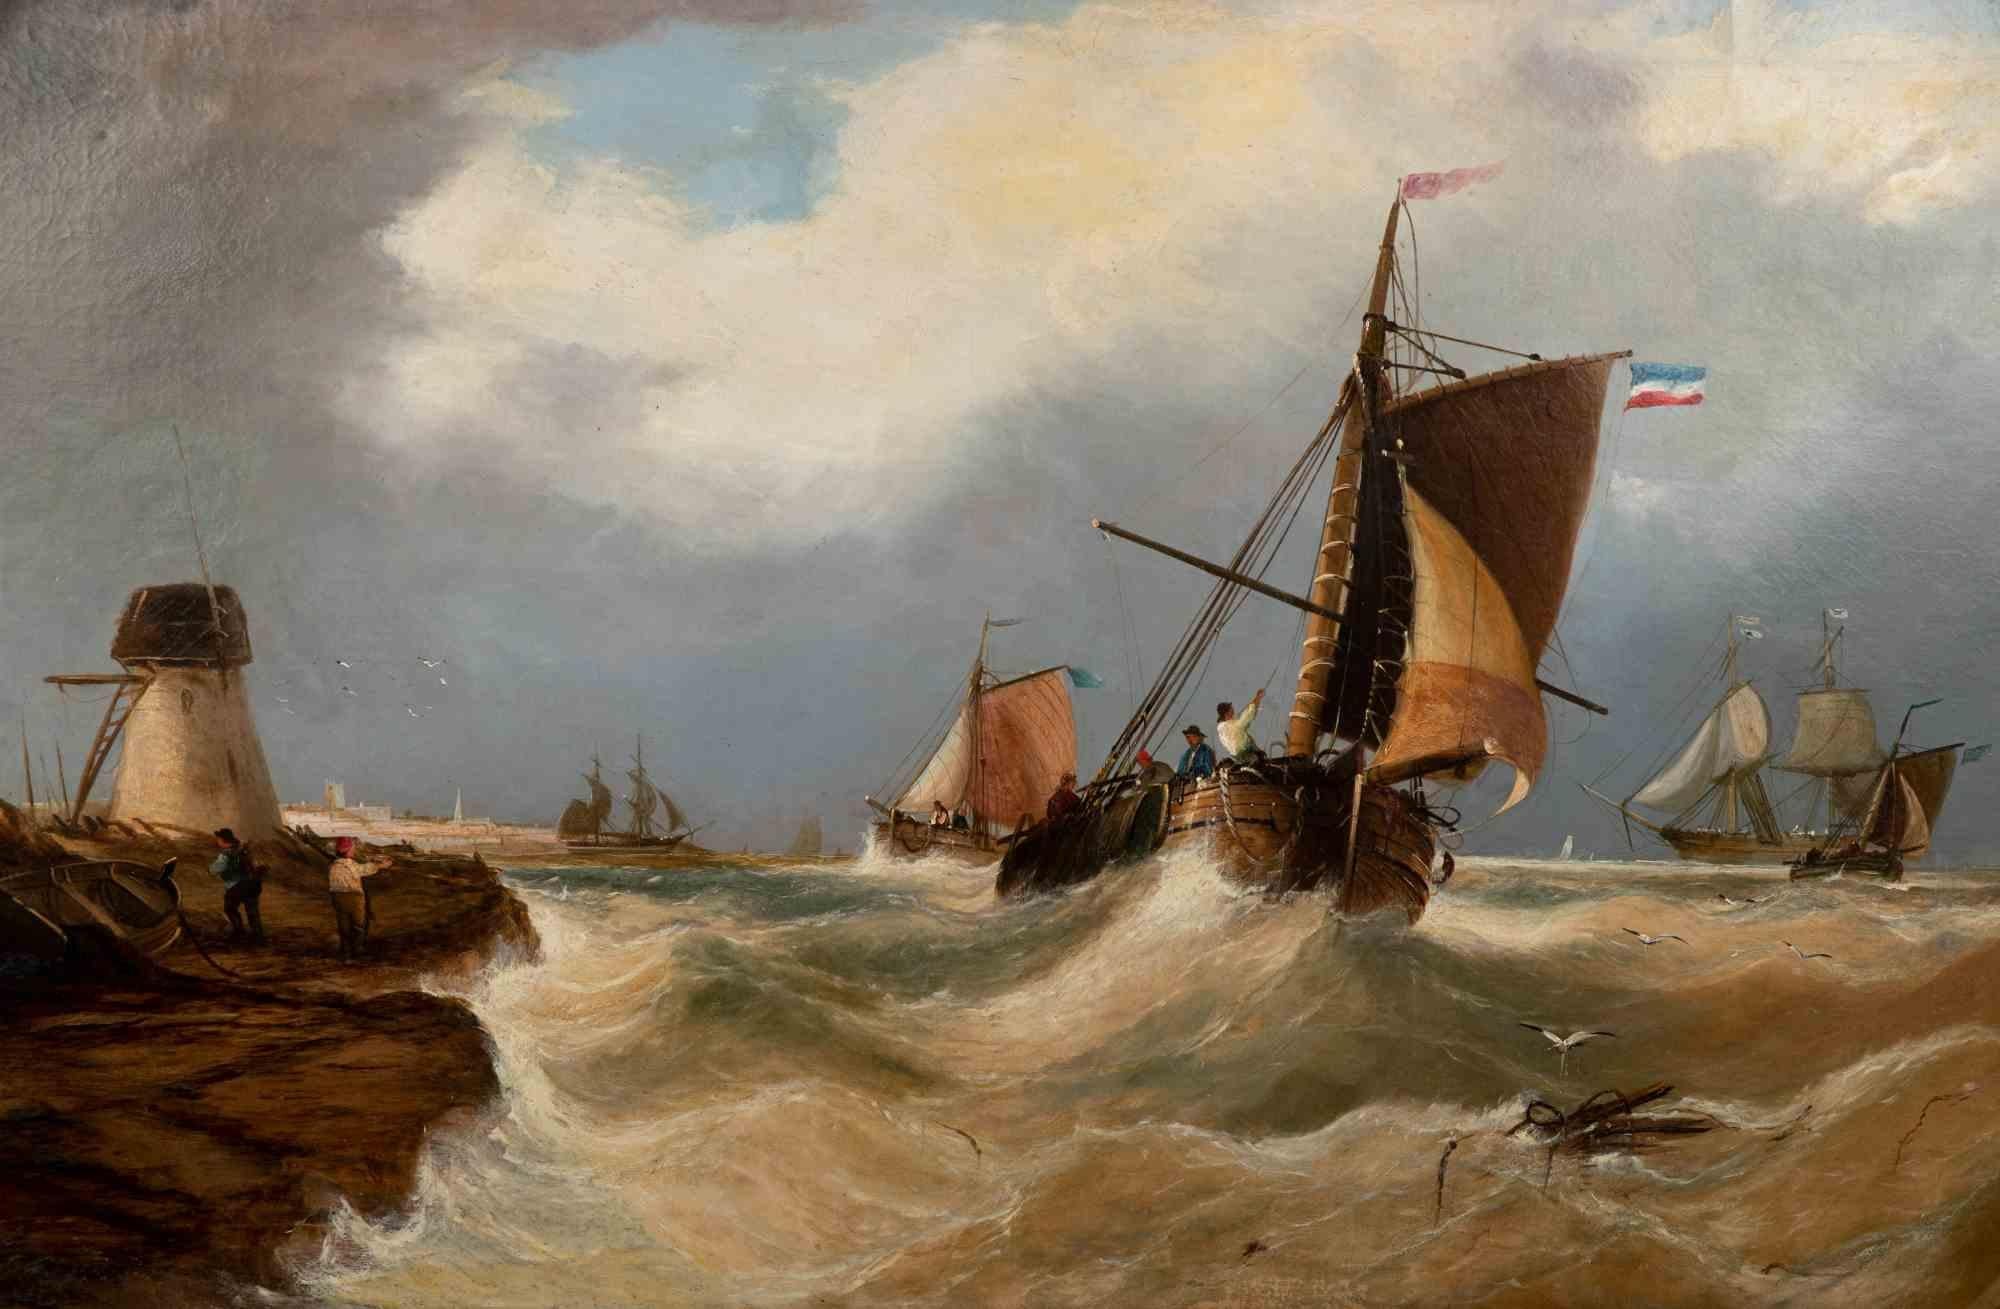 Stormy Sea - Mixed colored Oil on Canvas - Mid-19th Century - Painting by Unknown